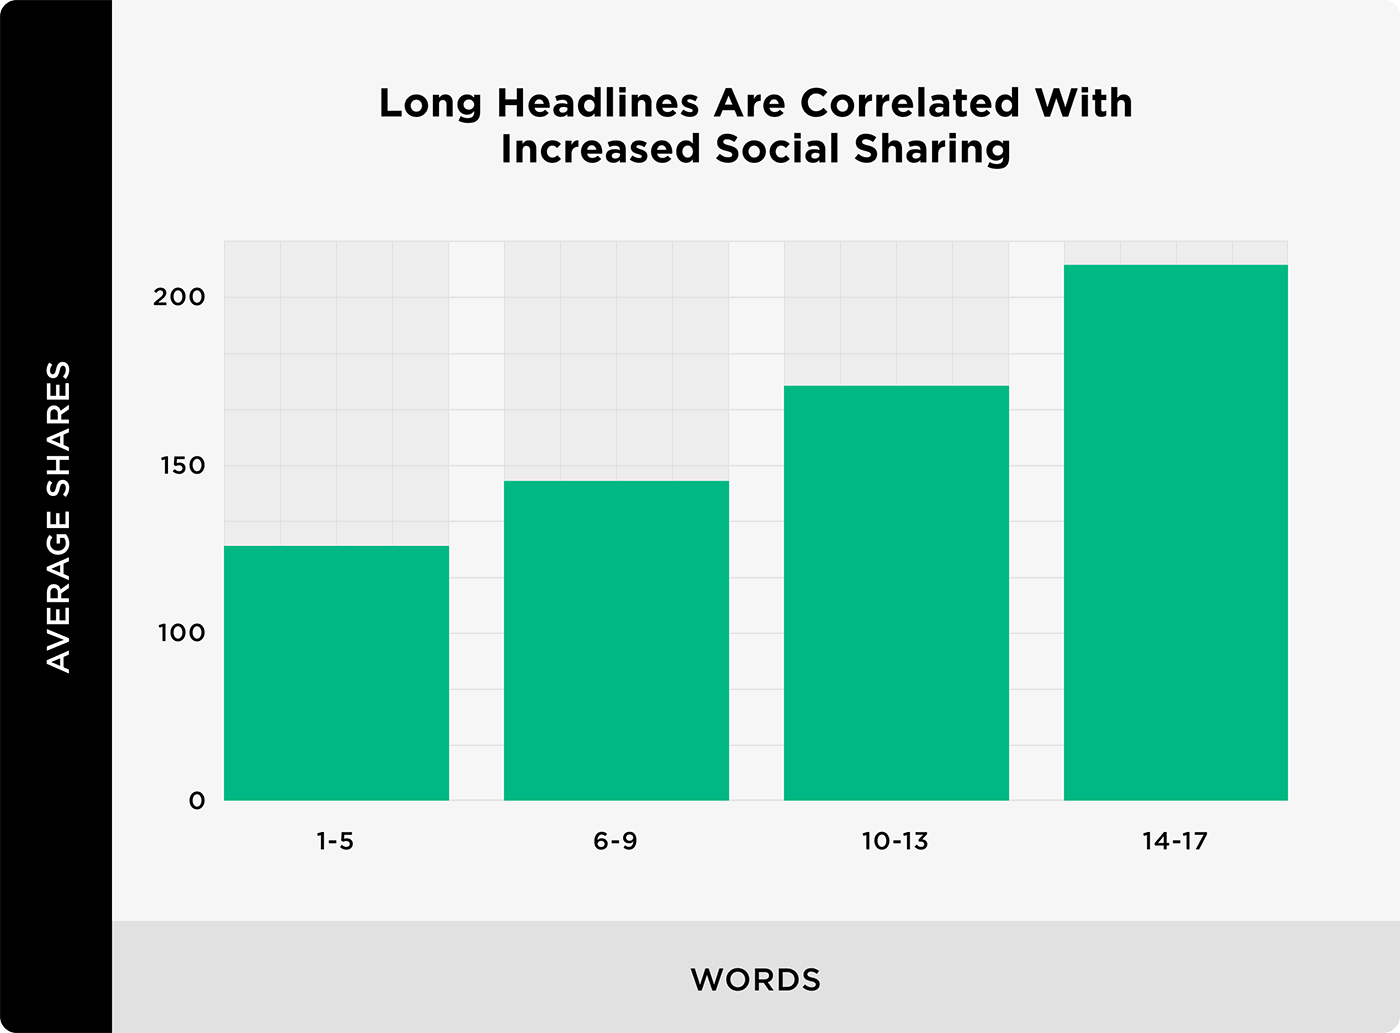 Long headlines are correlated with increased social sharing